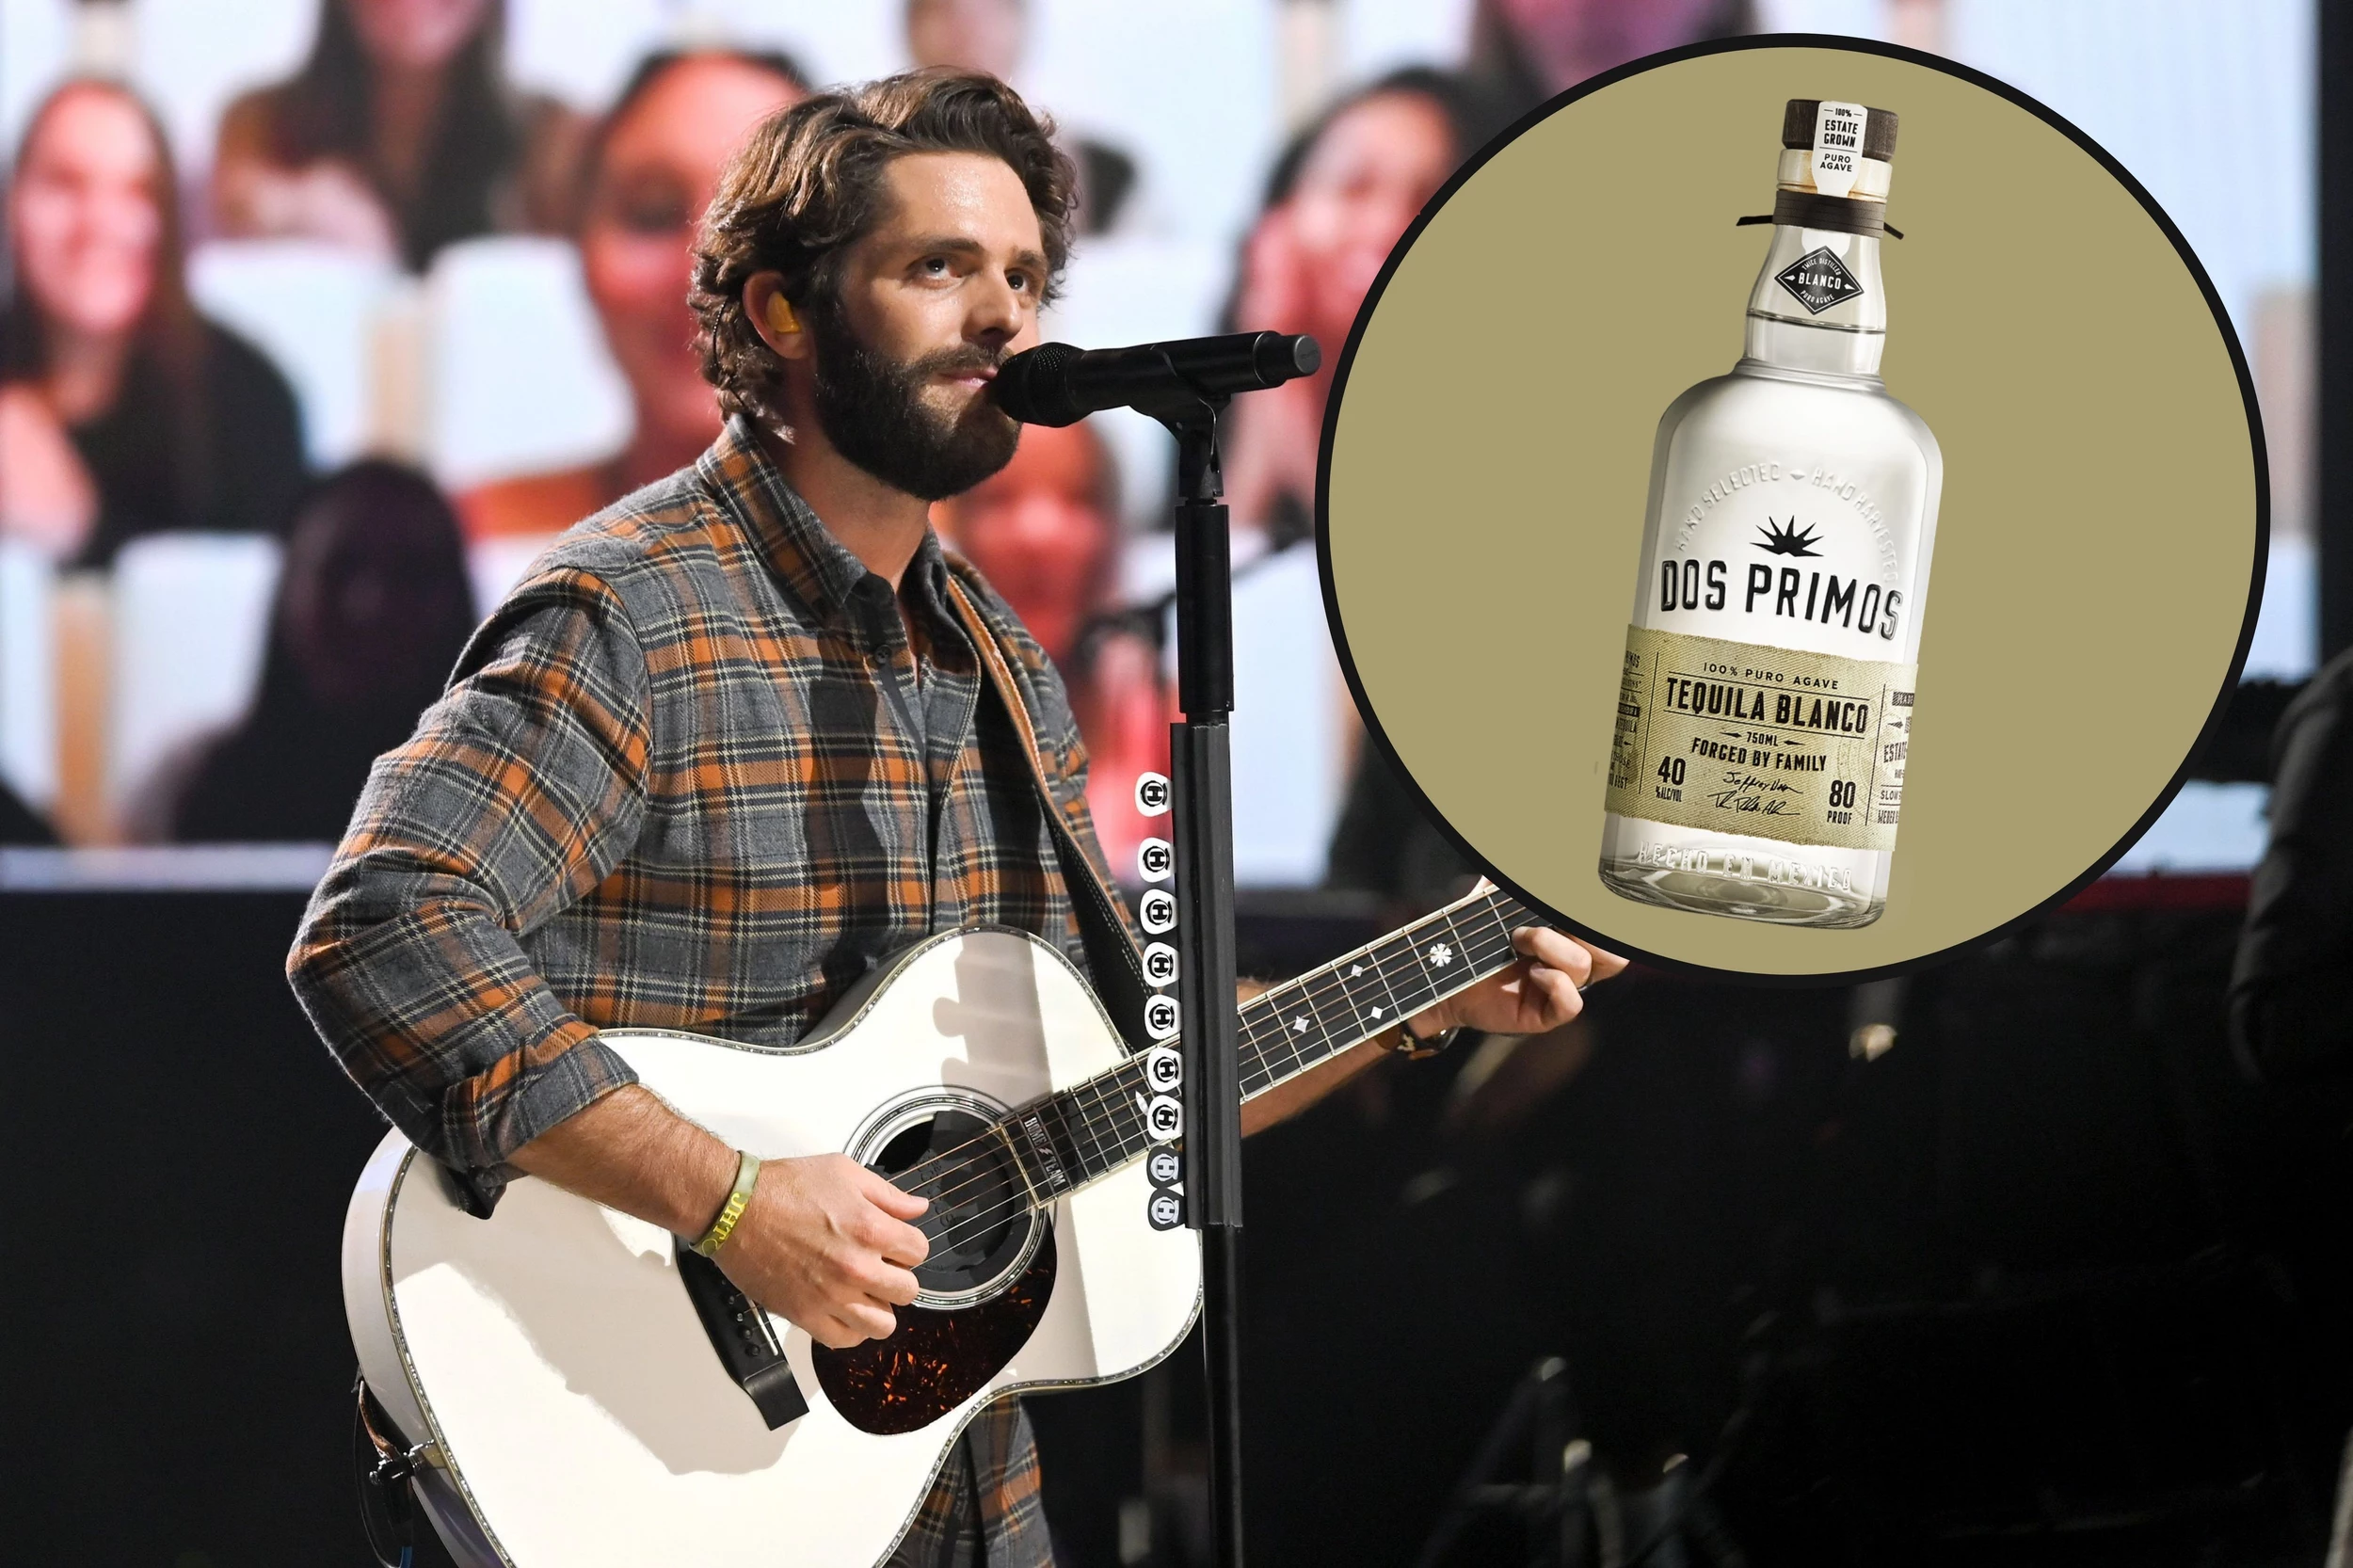 Thomas Rhett brings country to Penn State with his 'Home Team 2023